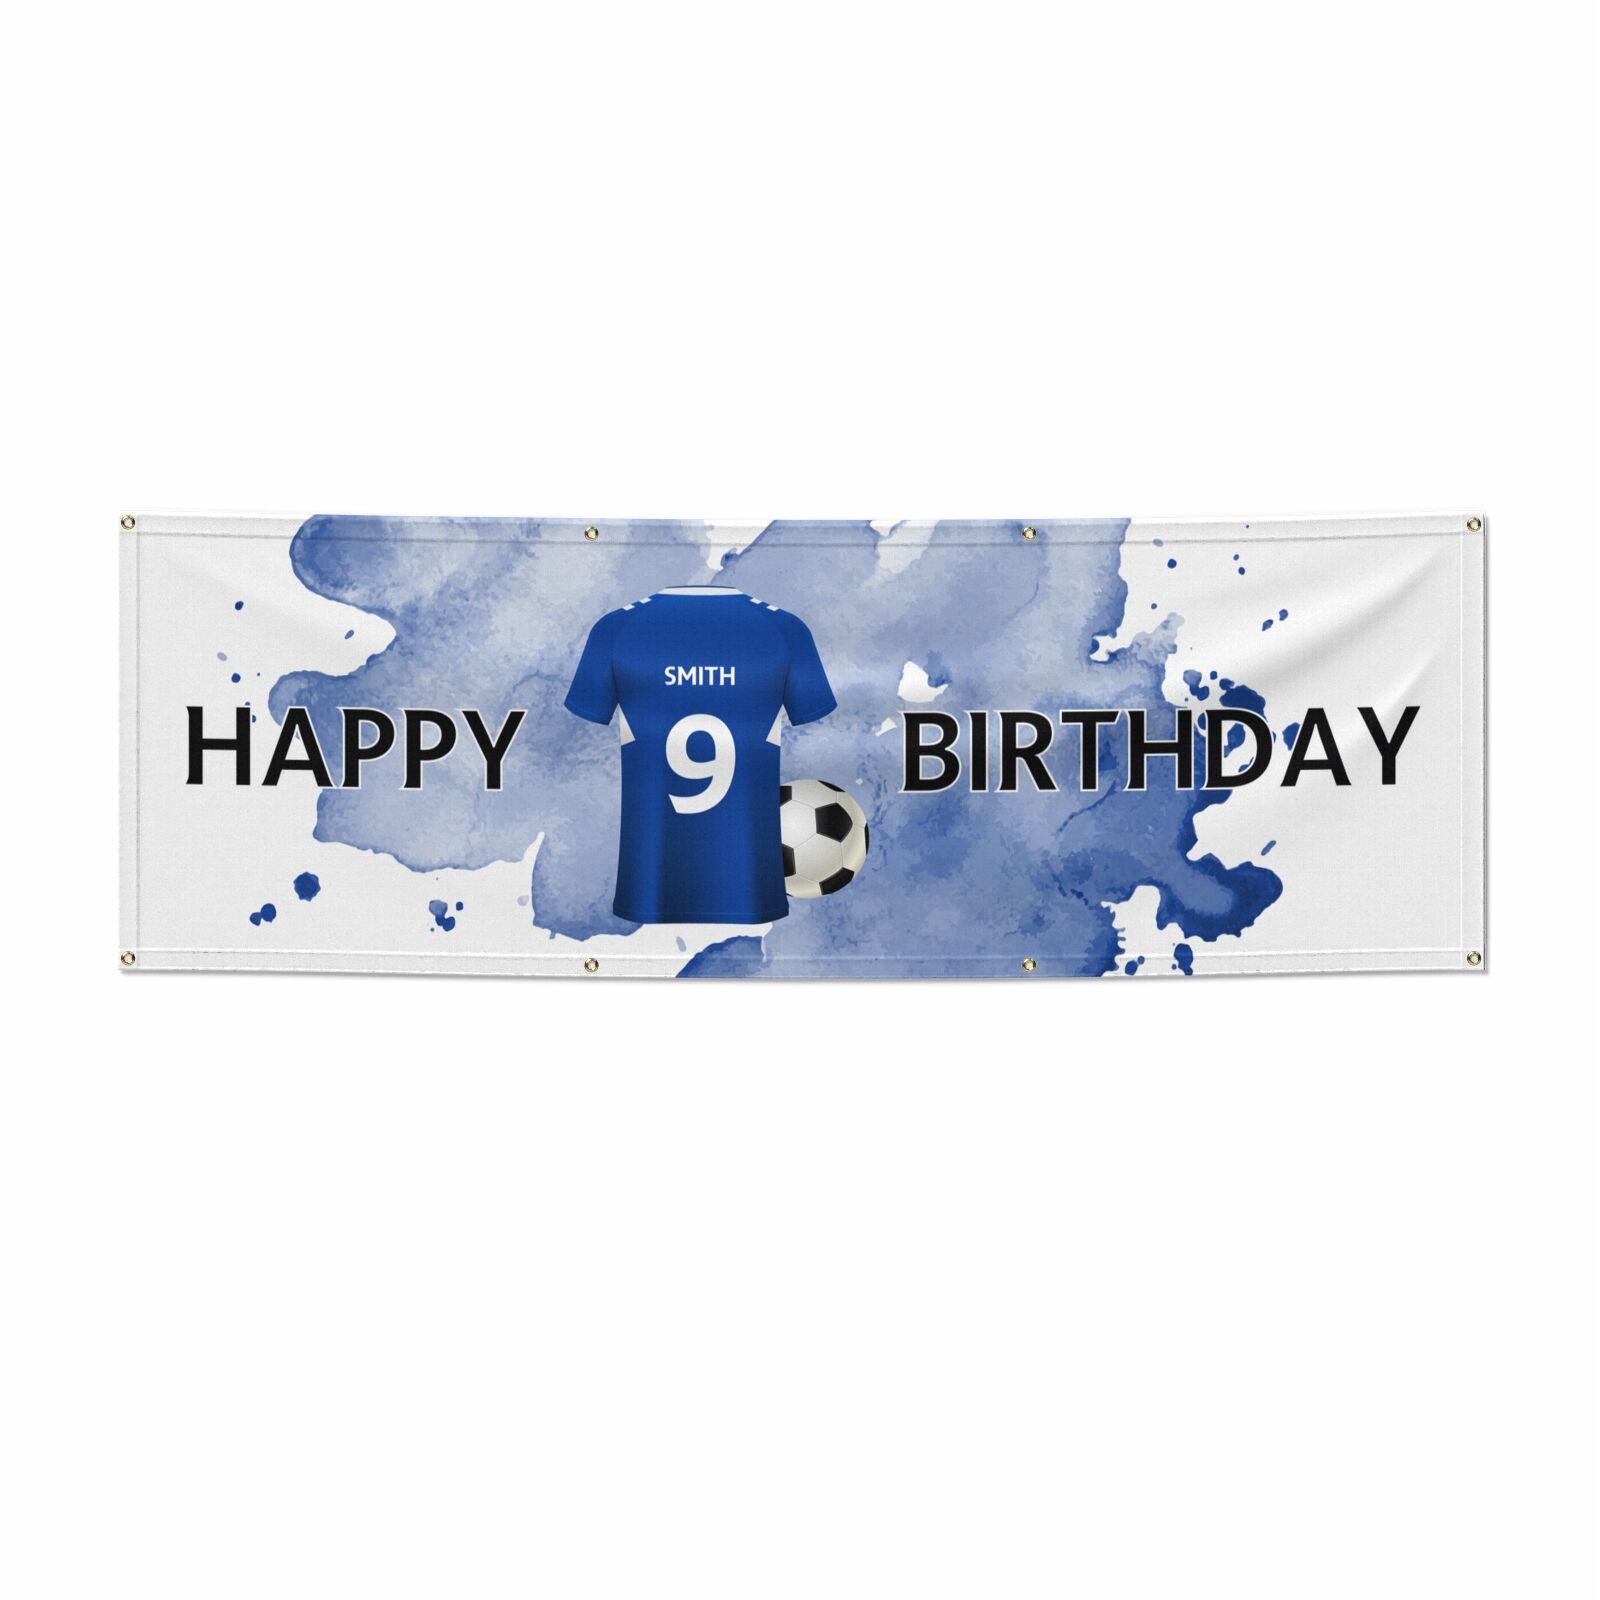 Blue Personalised Name Number Football Shirt 6x2 Vinly Banner with Grommets